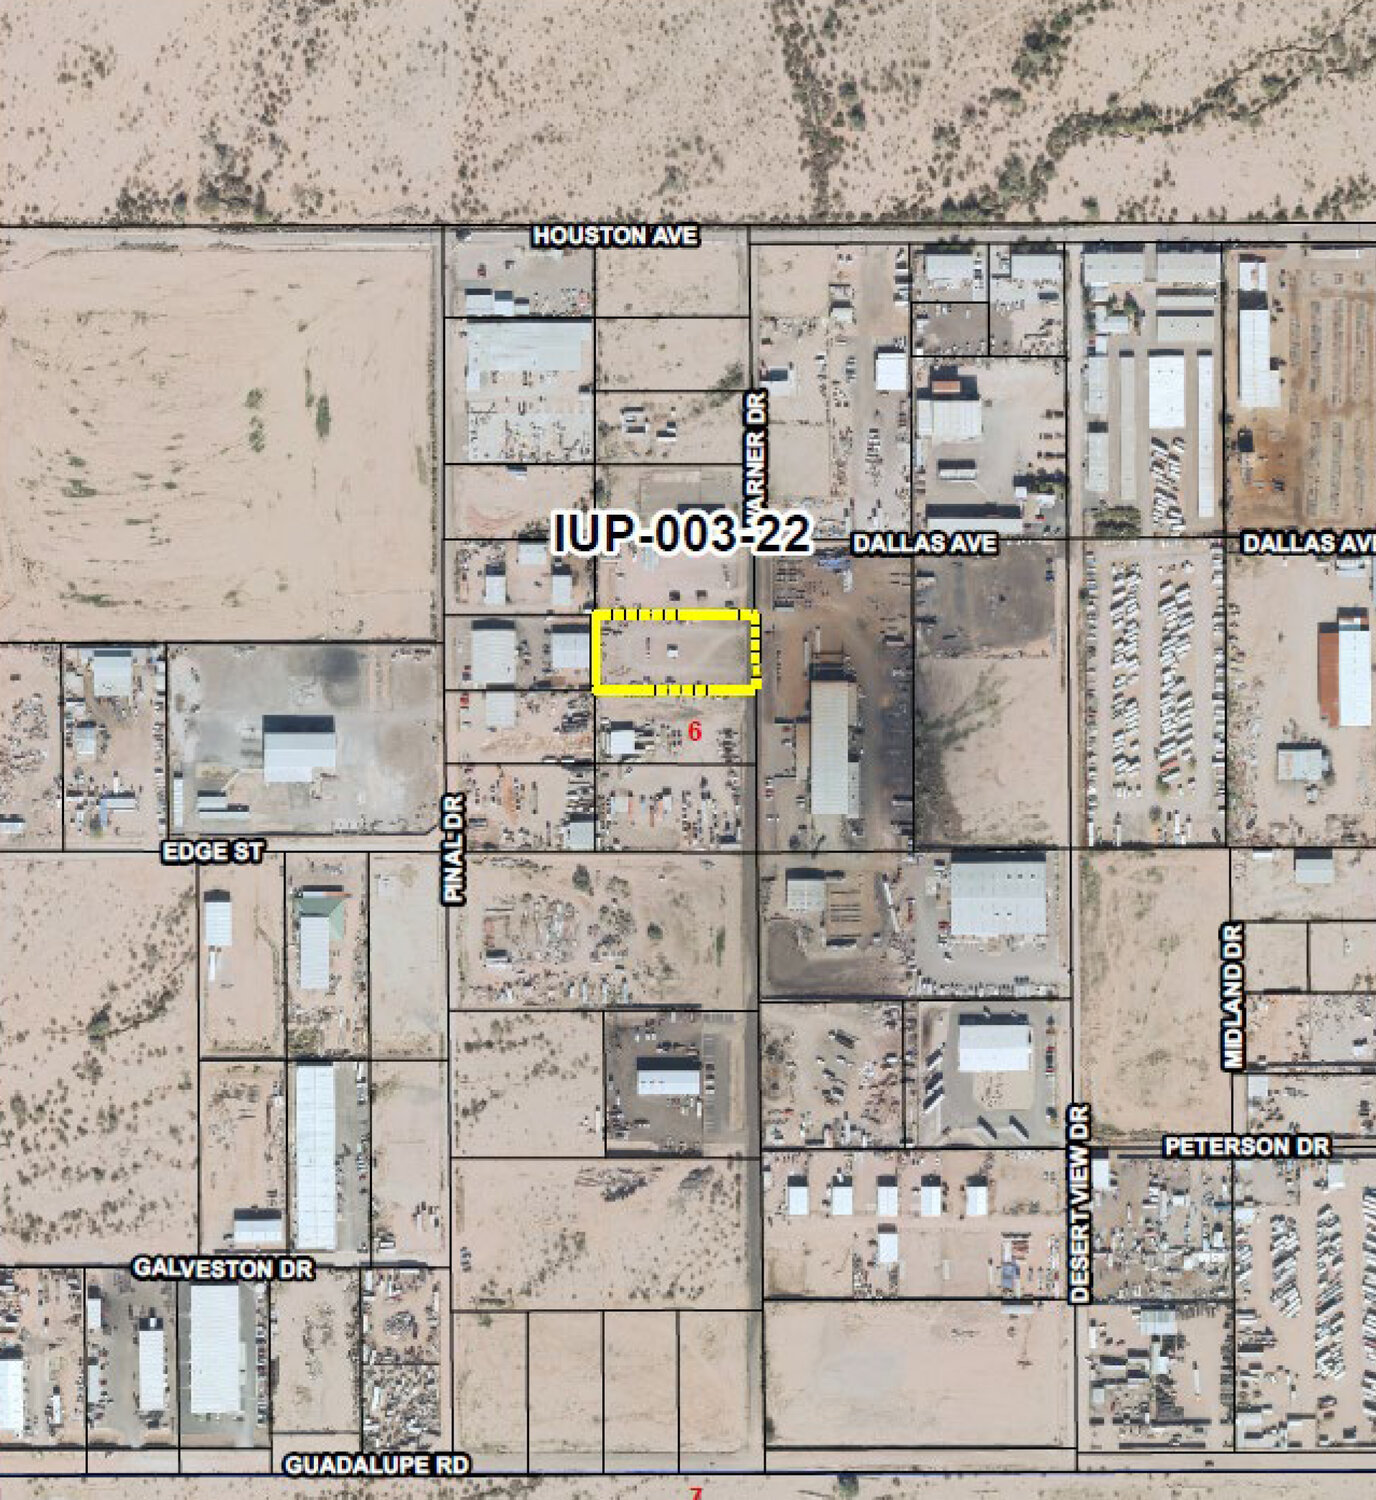 The Pinal County Board of Supervisors is to hold a public hearing on the permit at an Aug. 16 meeting, which begins at 9:30 a.m. at 135 N. Pinal St. in Florence.